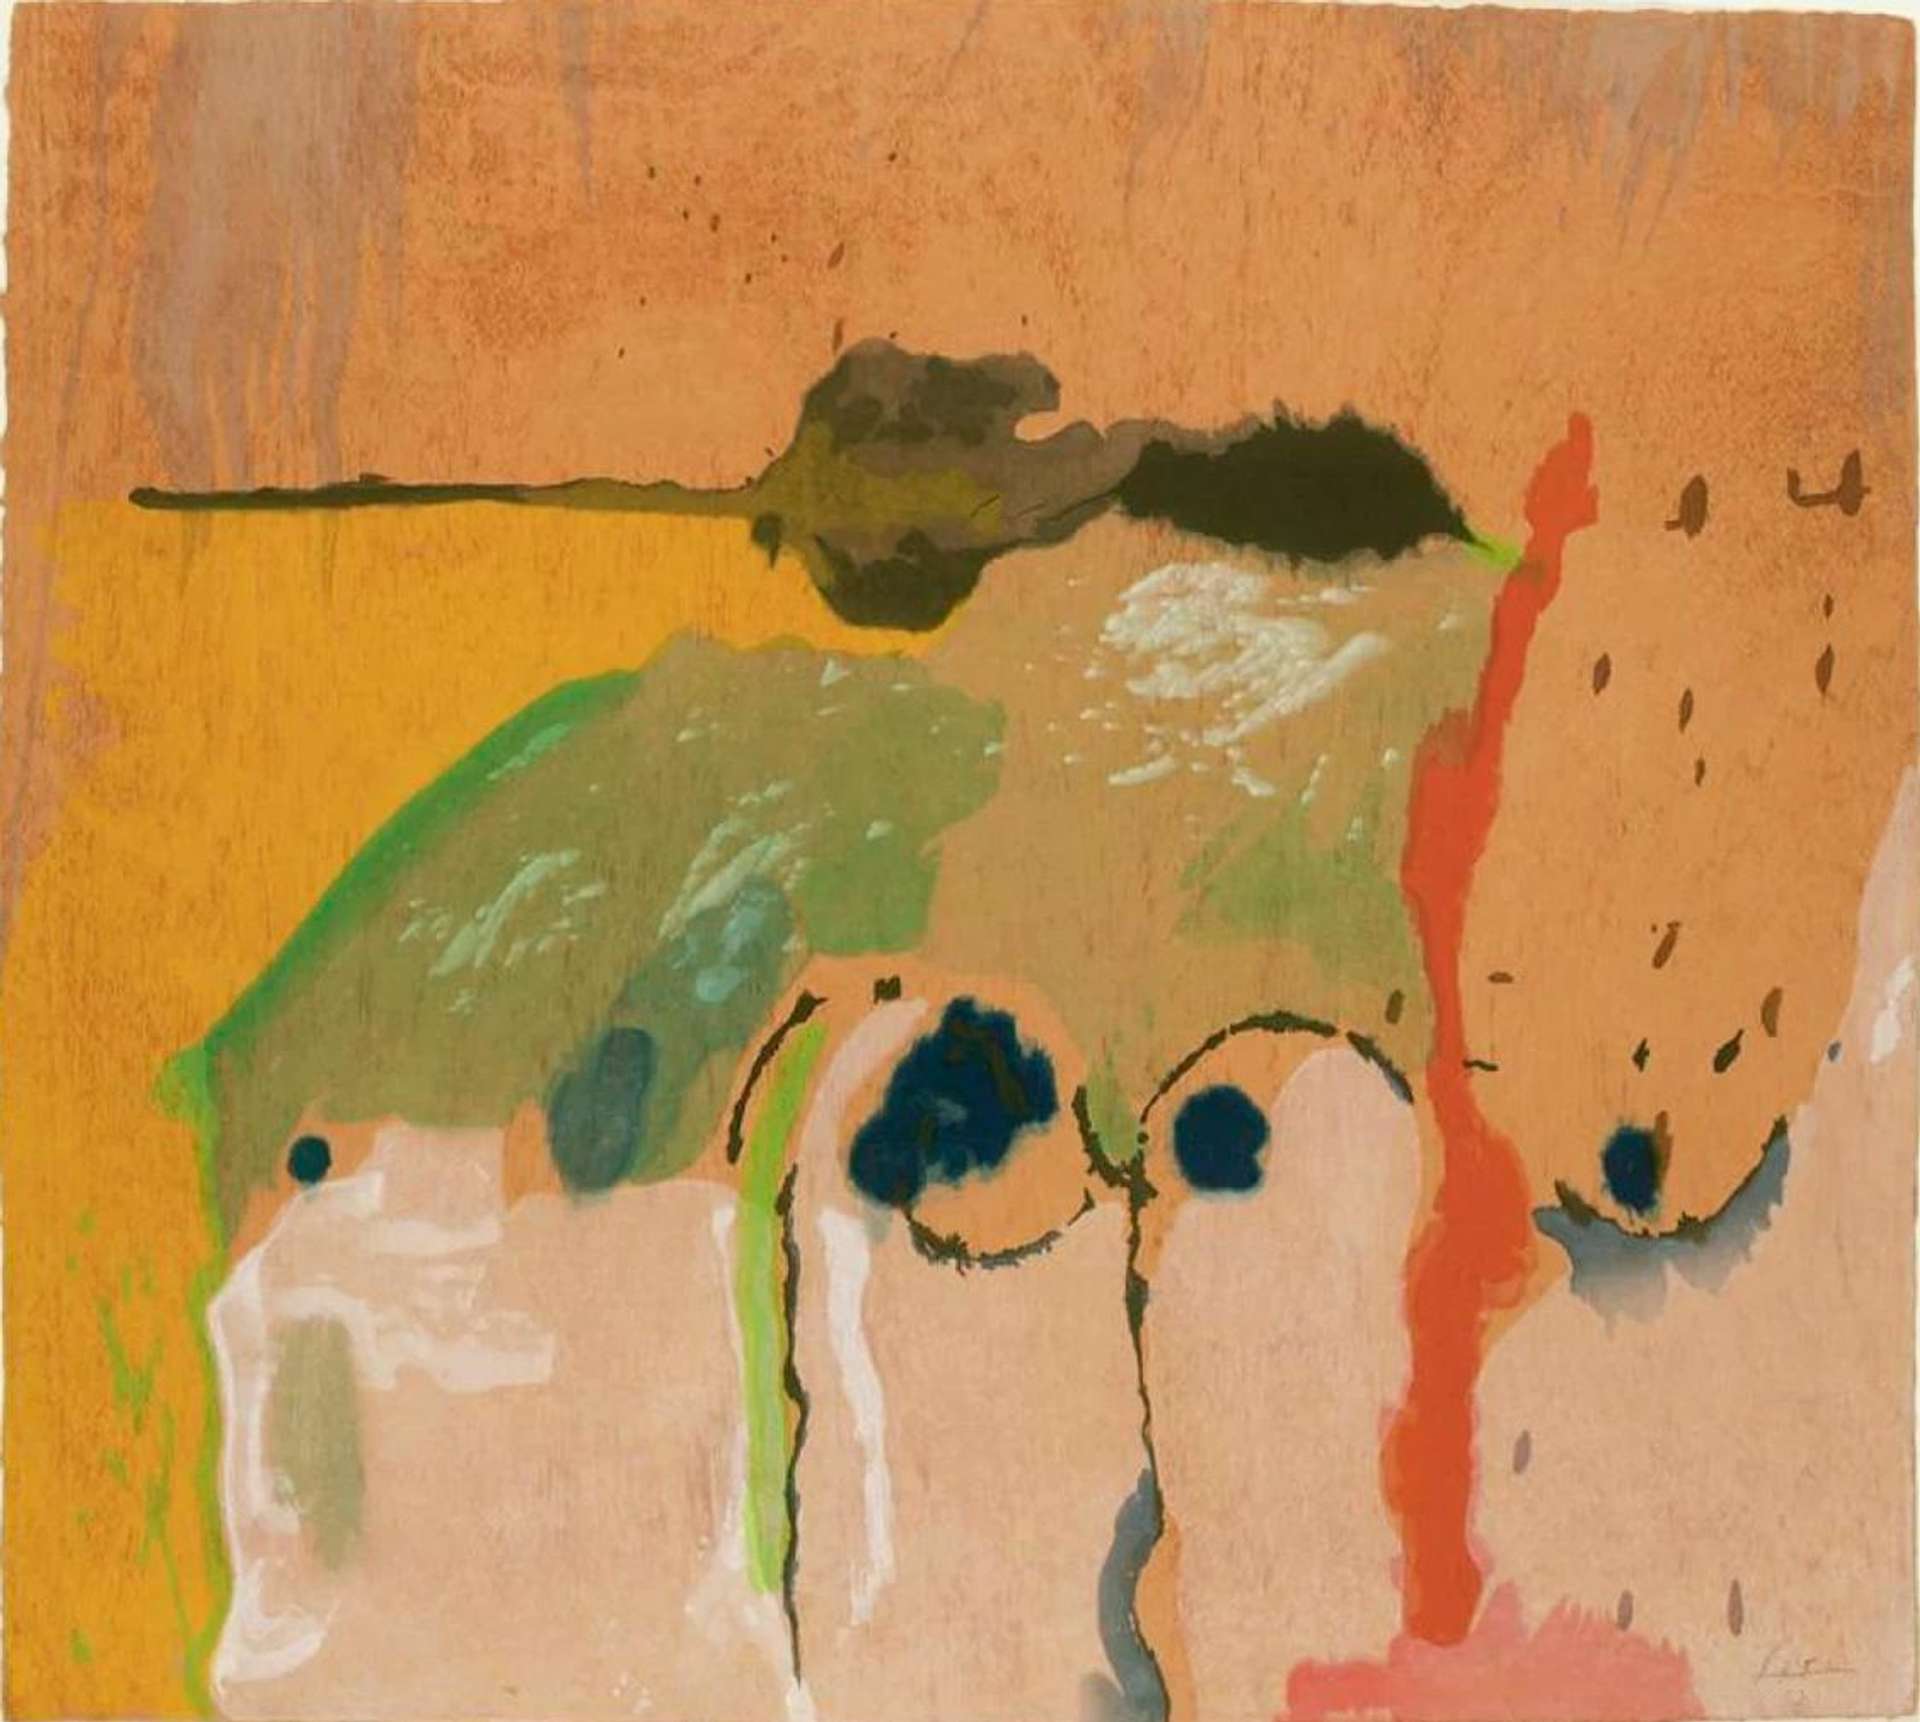 Helen Frankenthaler’s Tales Of Genji I. An abstract expressionist woodcut of an orange background with green, red, and white pigment.